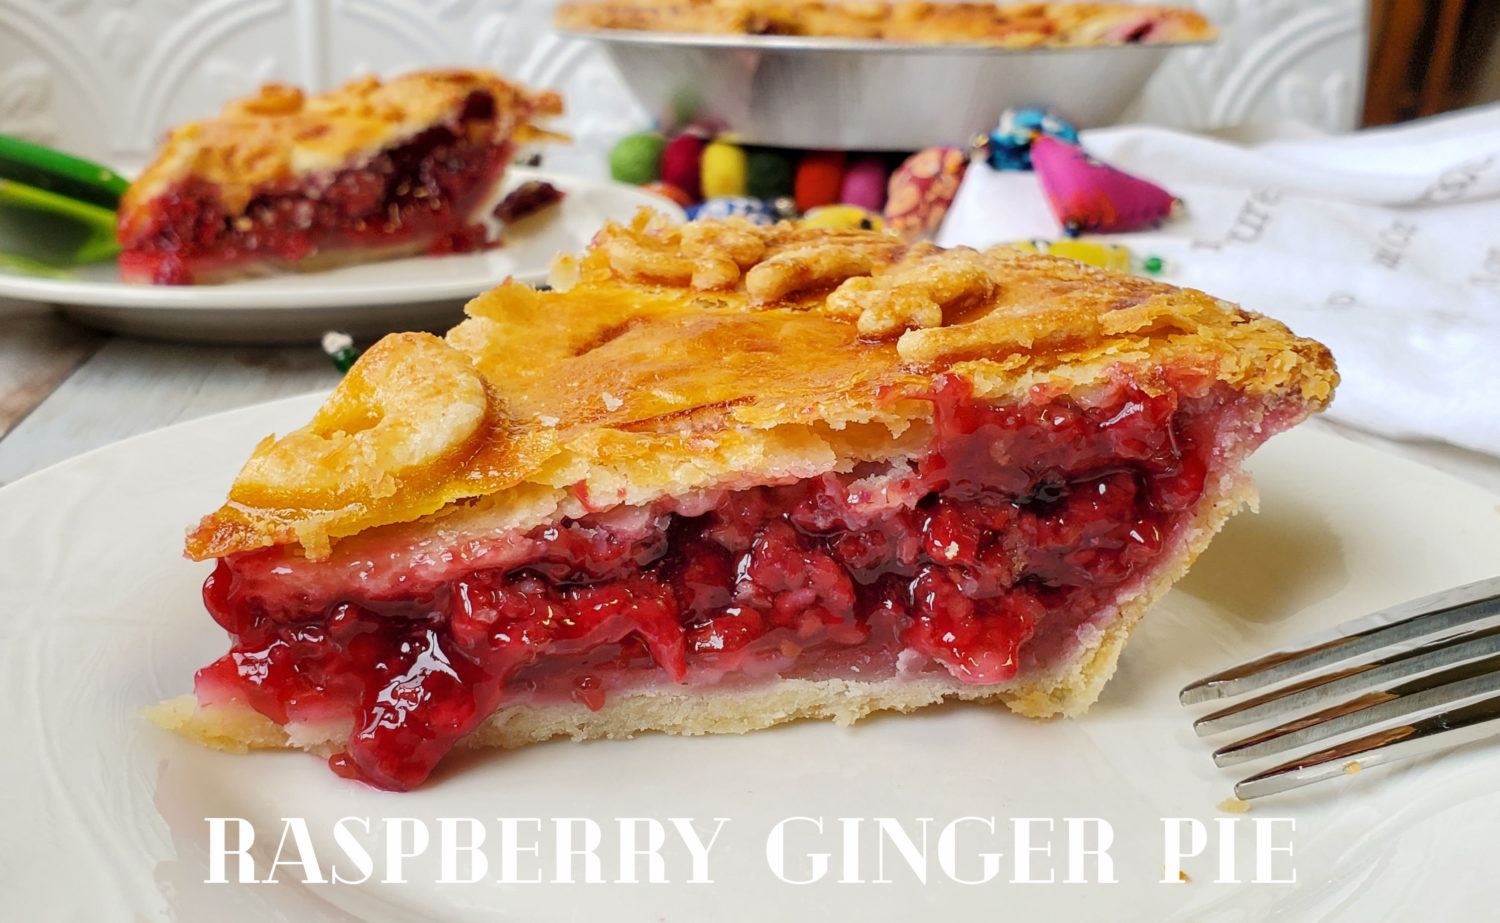 Raspberry Ginger Pie for Pi 3.14 Day (or any day): Fresh red raspberries and fresh ginger; a berry-licious pie baked in a super flaky crust!